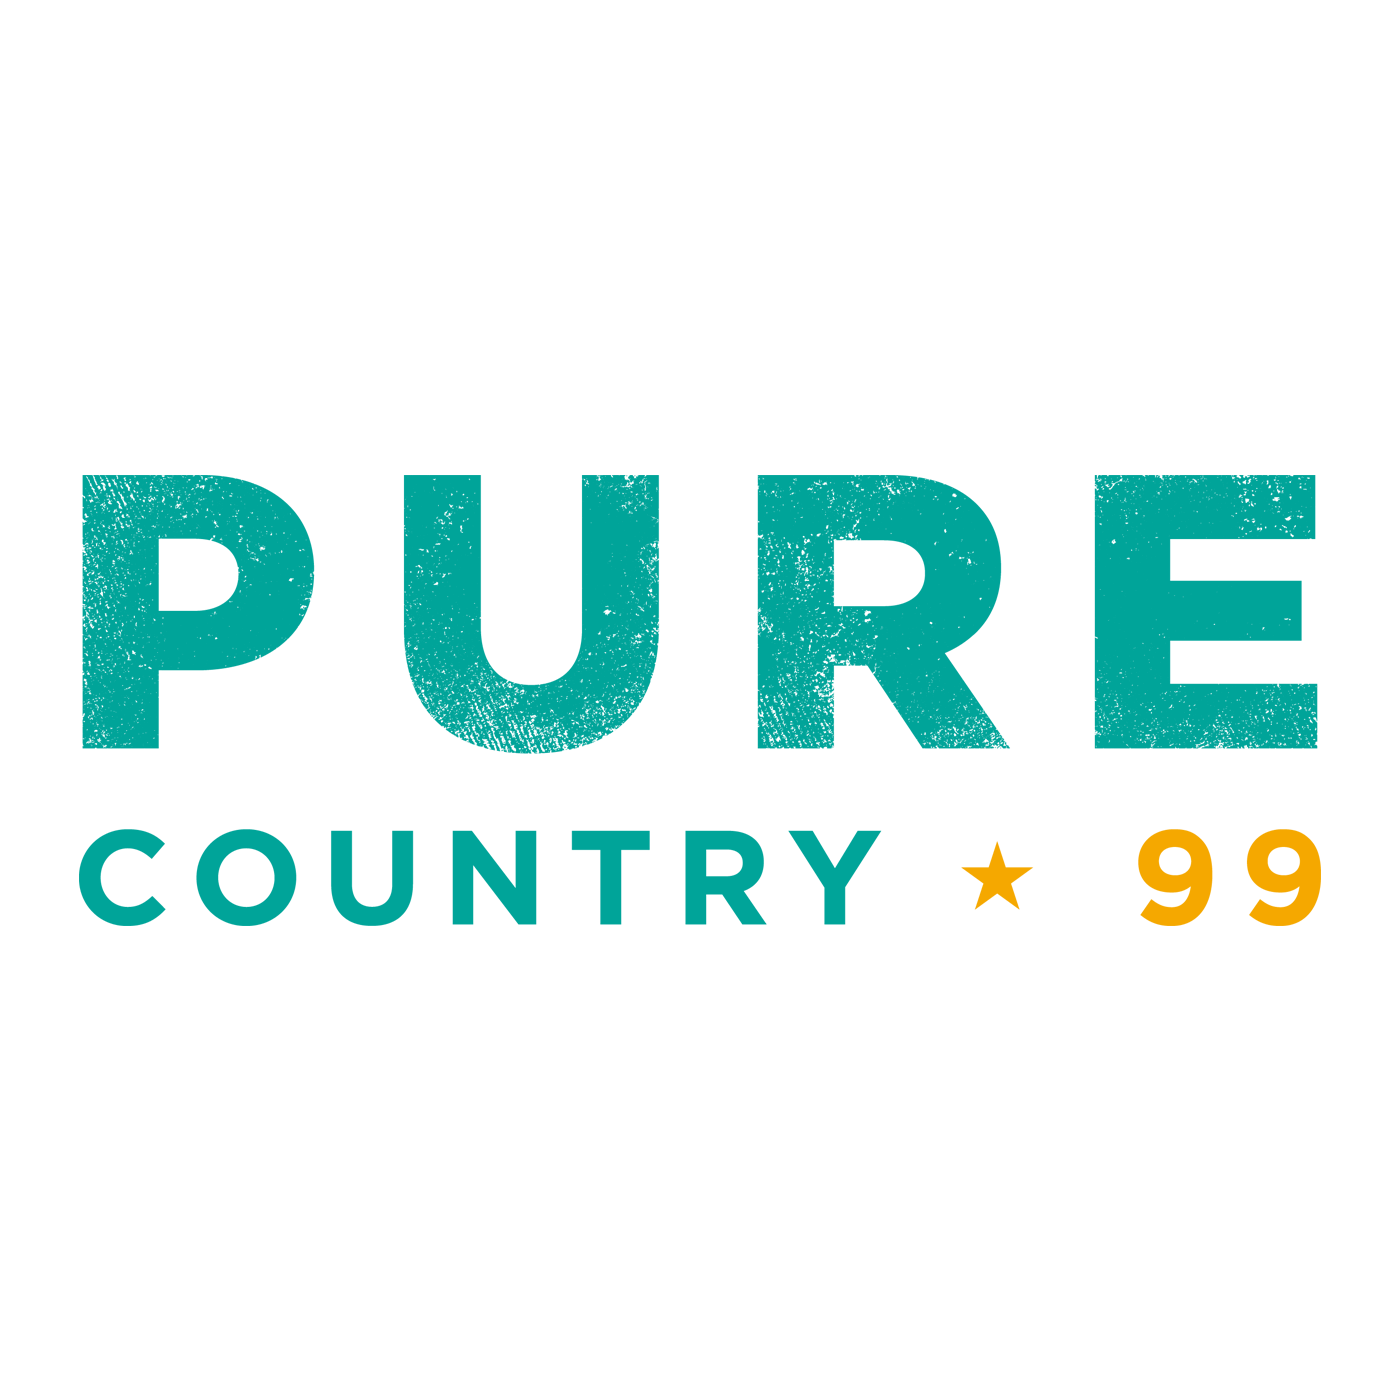 Kingston's Pure Country 99